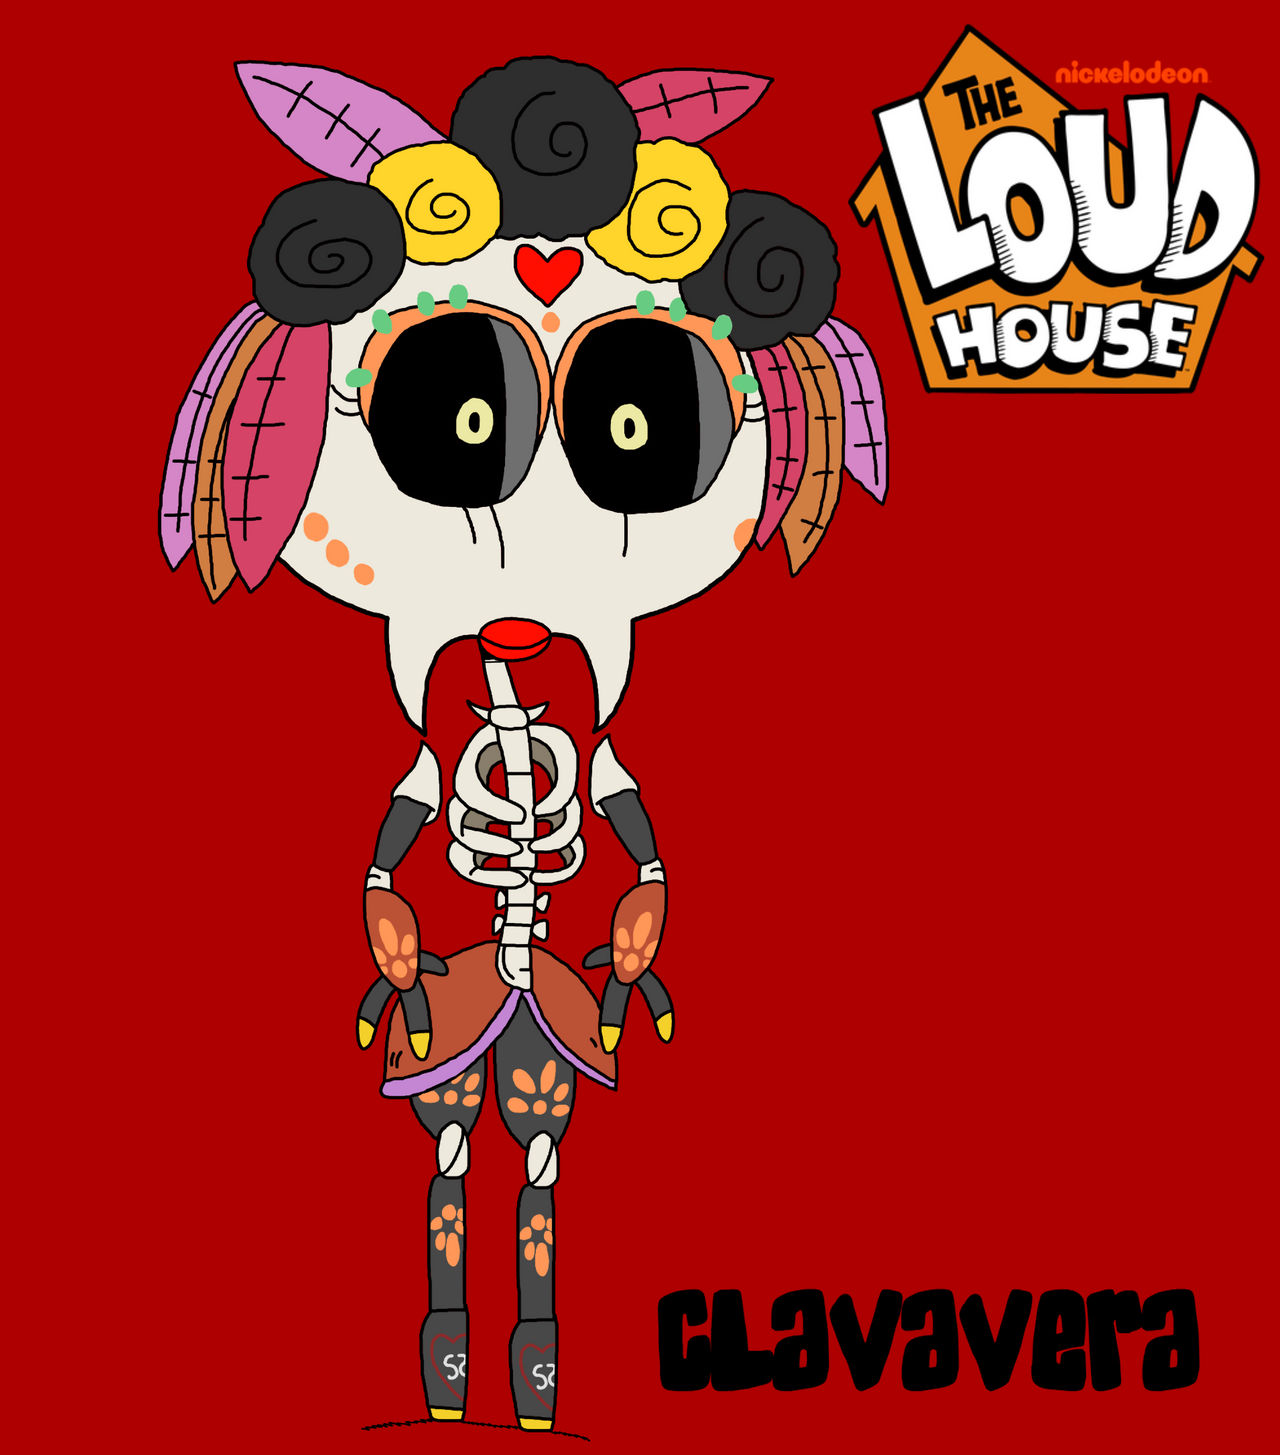 The Loud House Style: Epic Wubbox (Earth) by josias0303 on DeviantArt